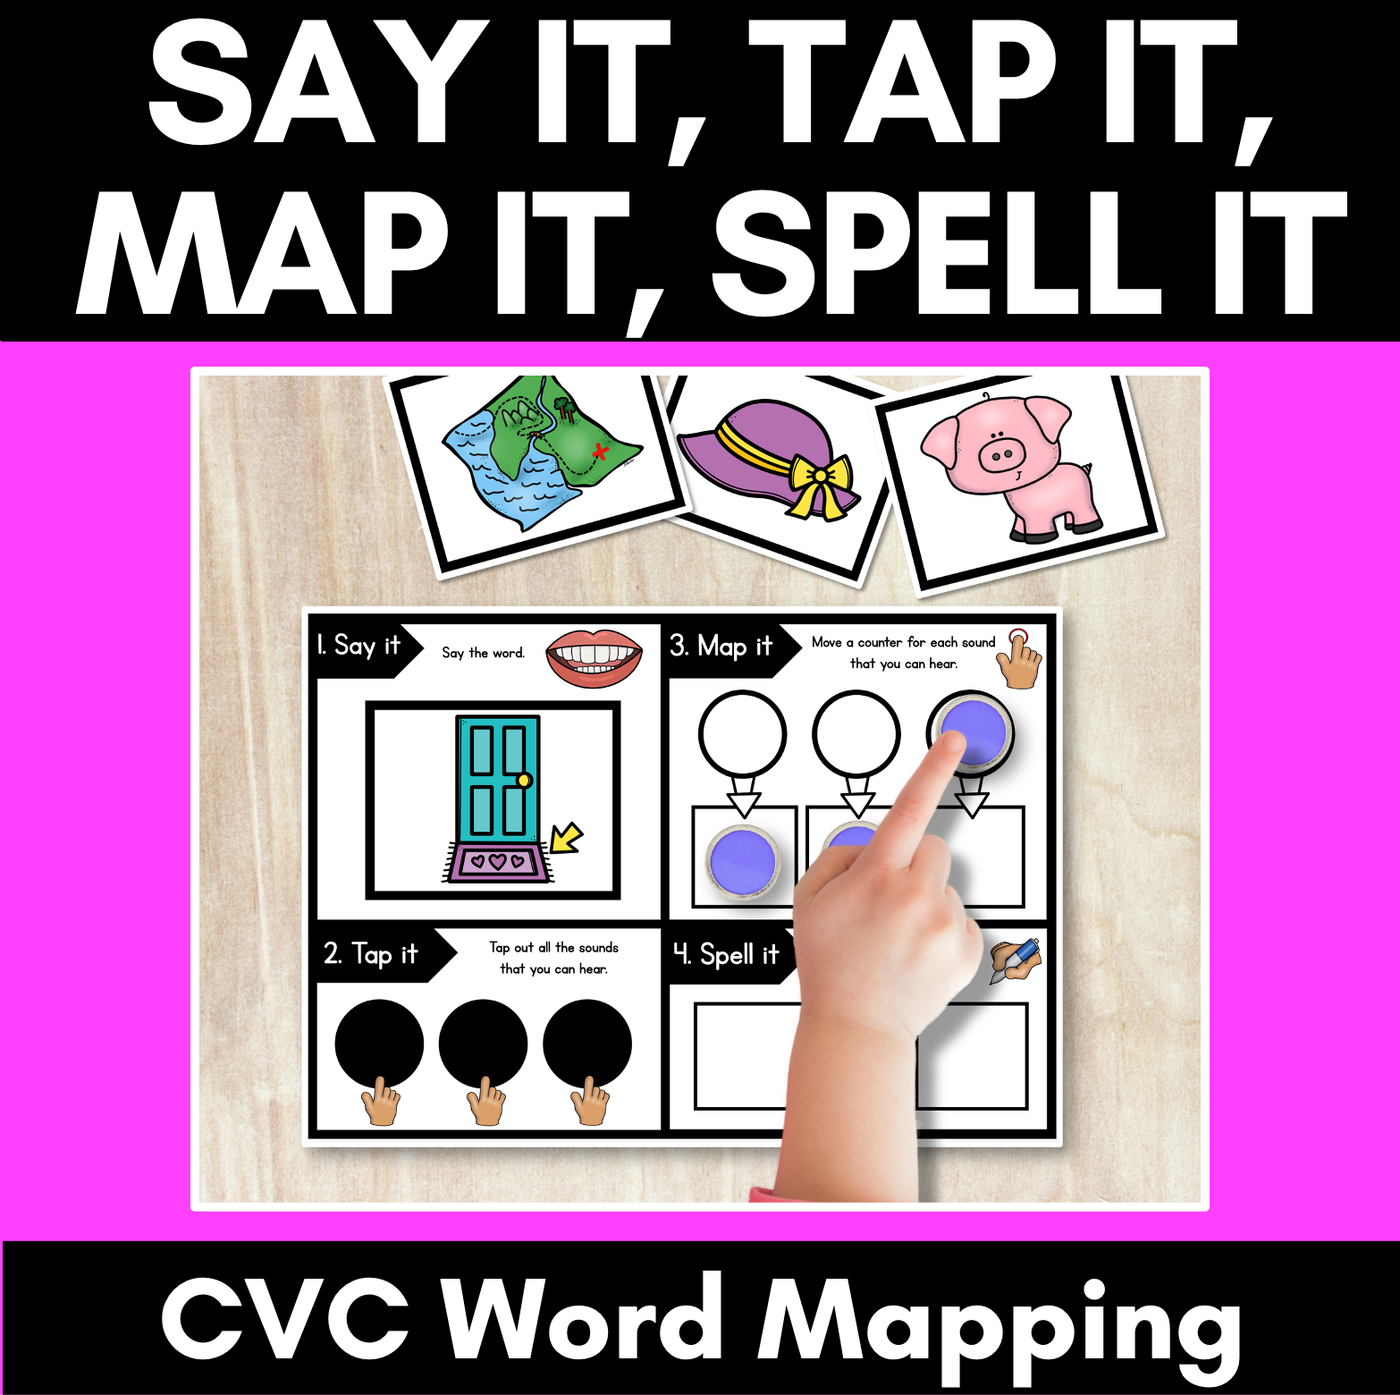 SAY IT TAP IT MAP IT SPELL IT - CVC Orthographic Mapping Mats